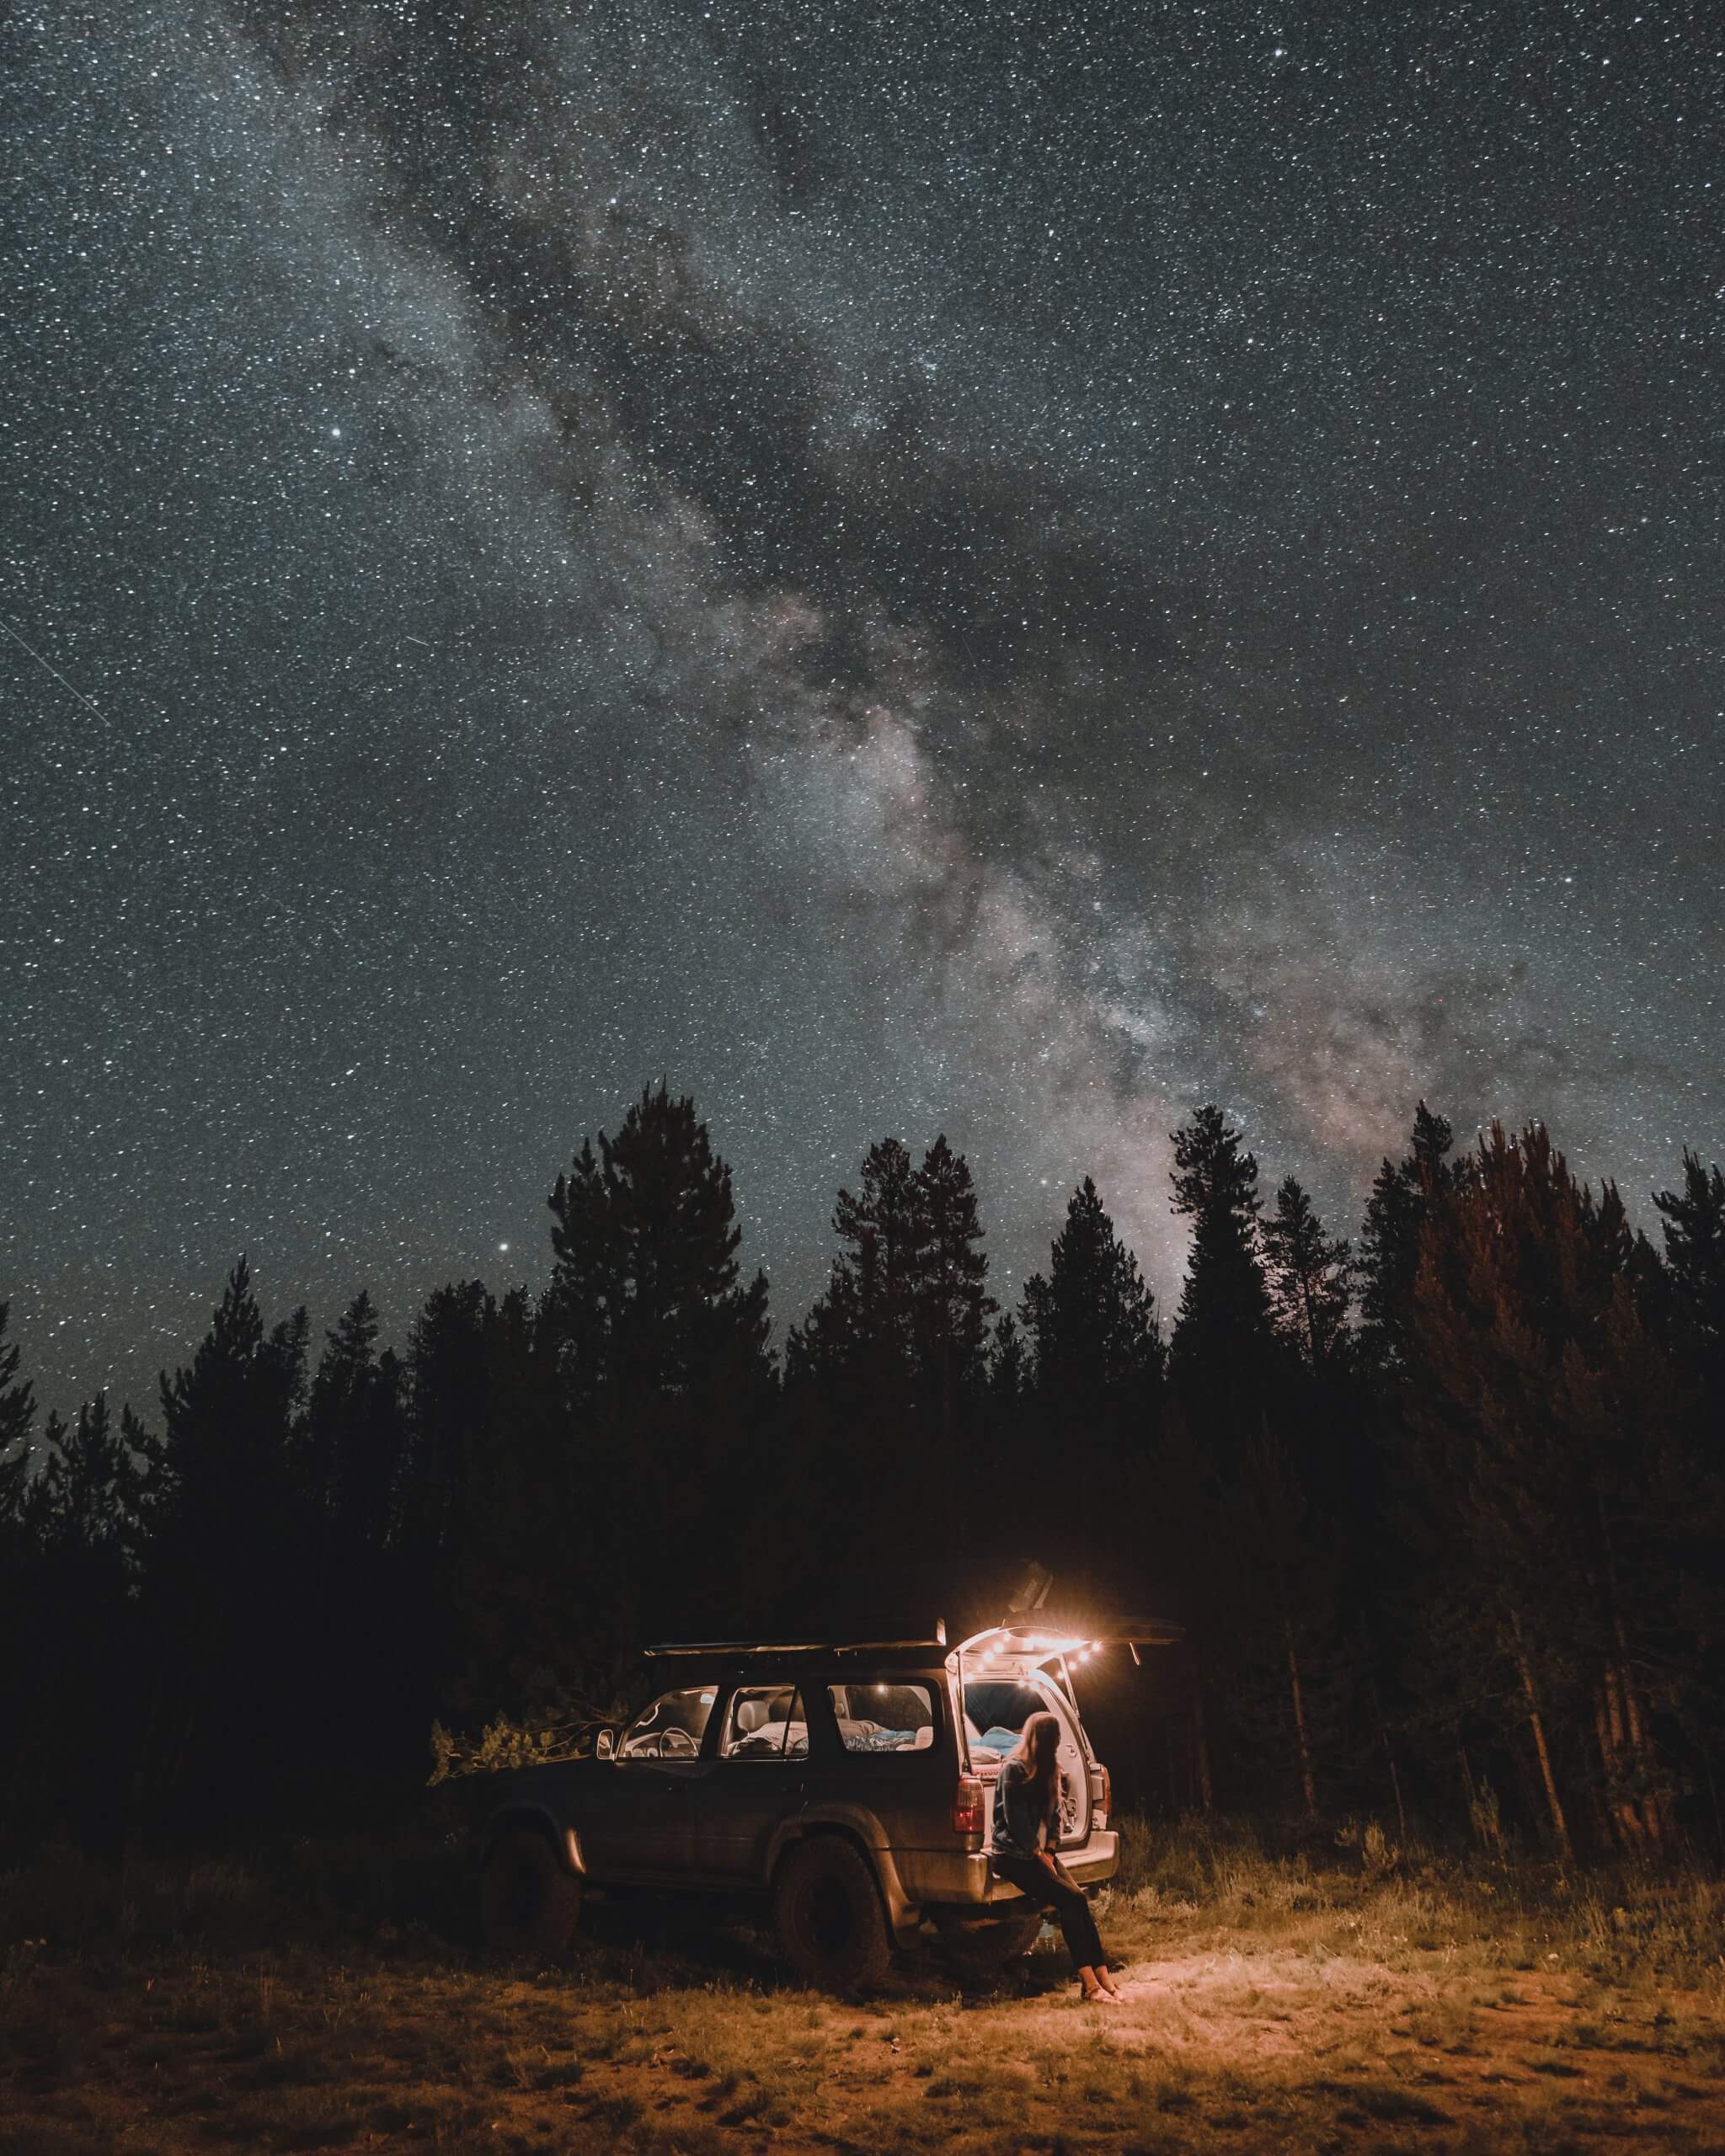 a person leaning against an suv amidst a forest under a starry sky